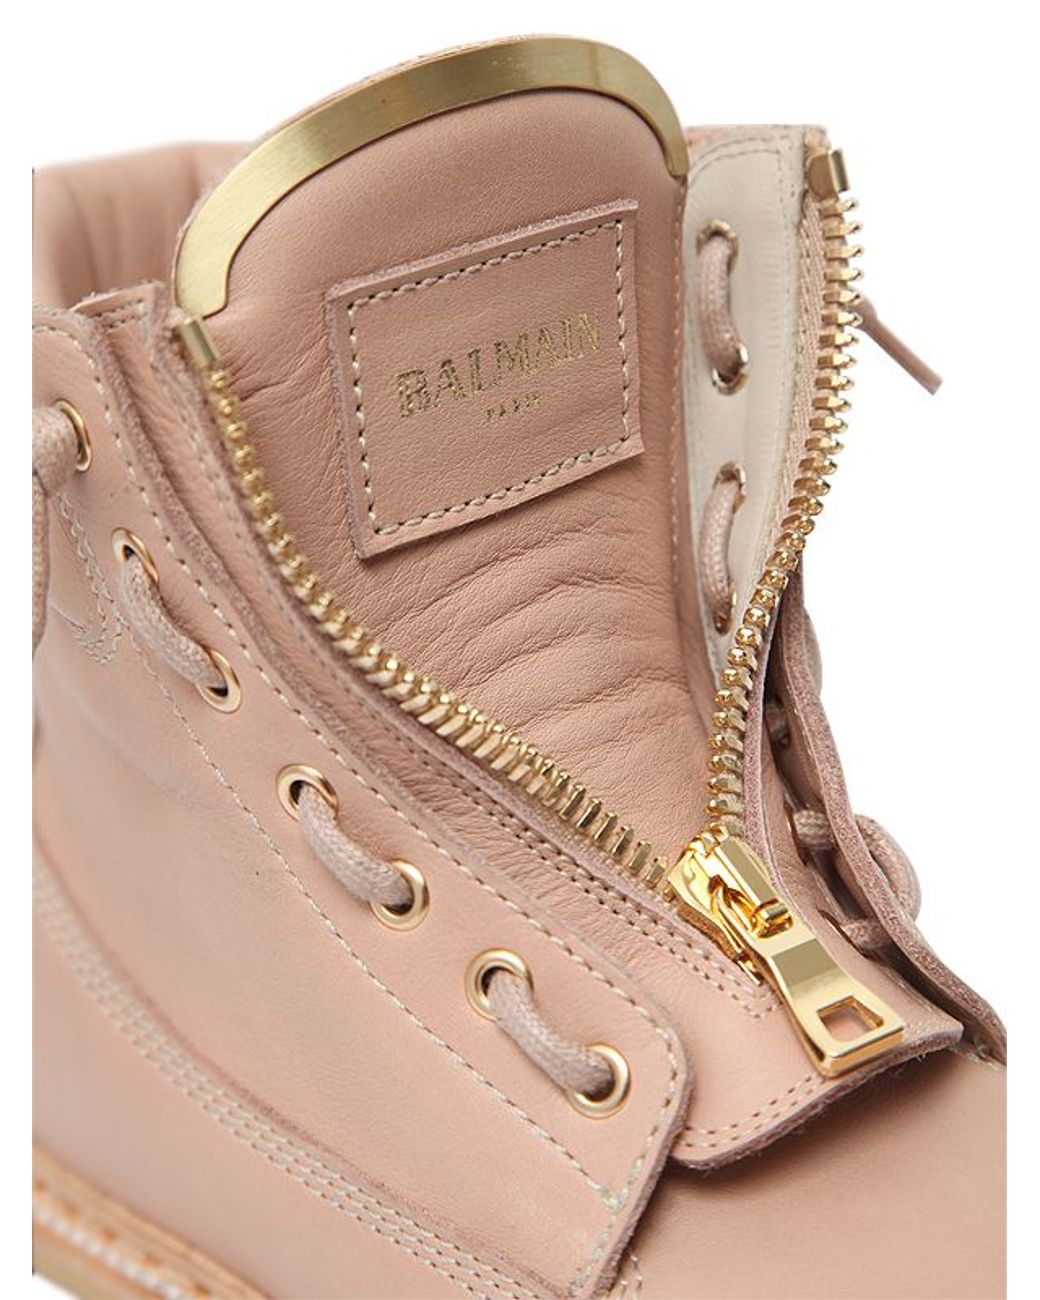 Balmain Taiga Leather Military Boots in Nude (Pink) | Lyst